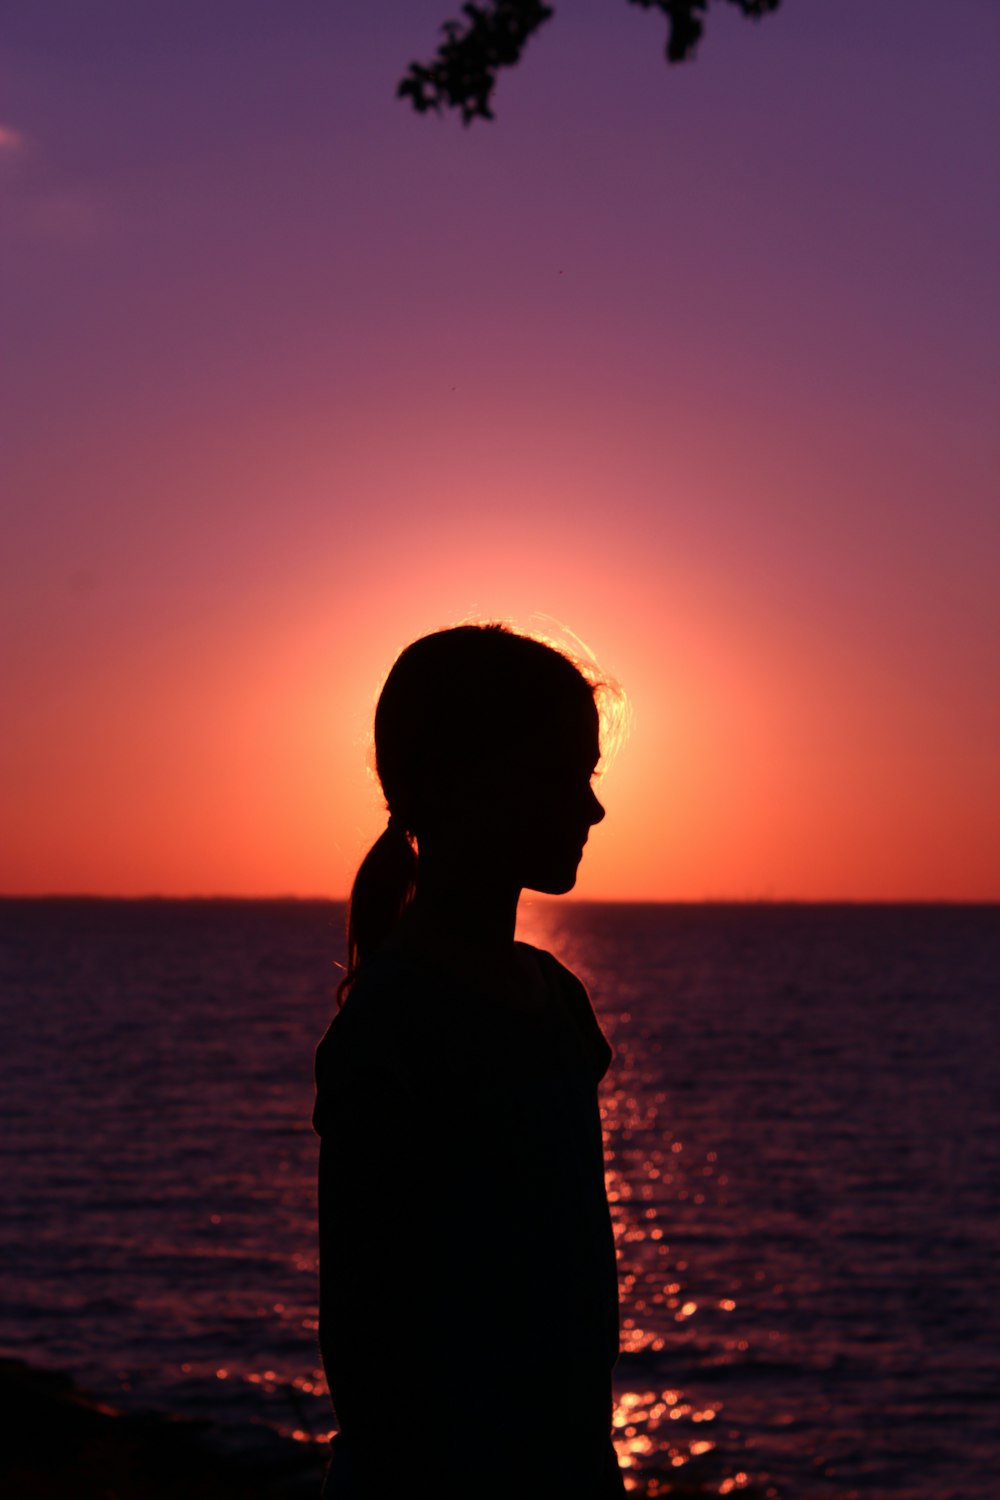 silhouette of woman standing near body of water during sunset